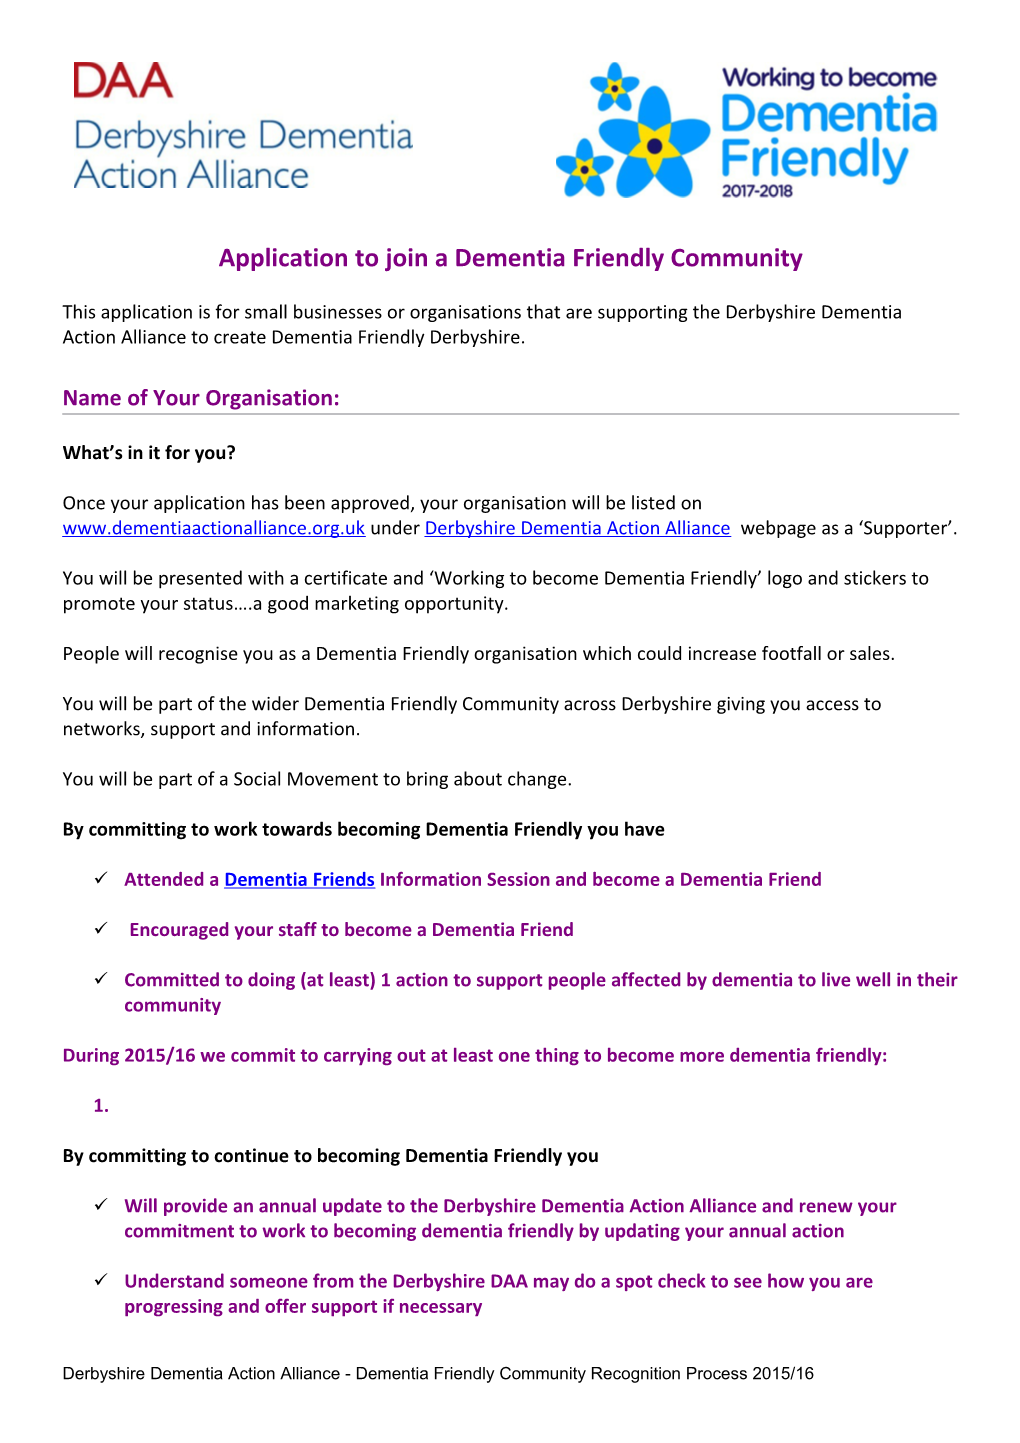 Application to Join a Dementia Friendly Community